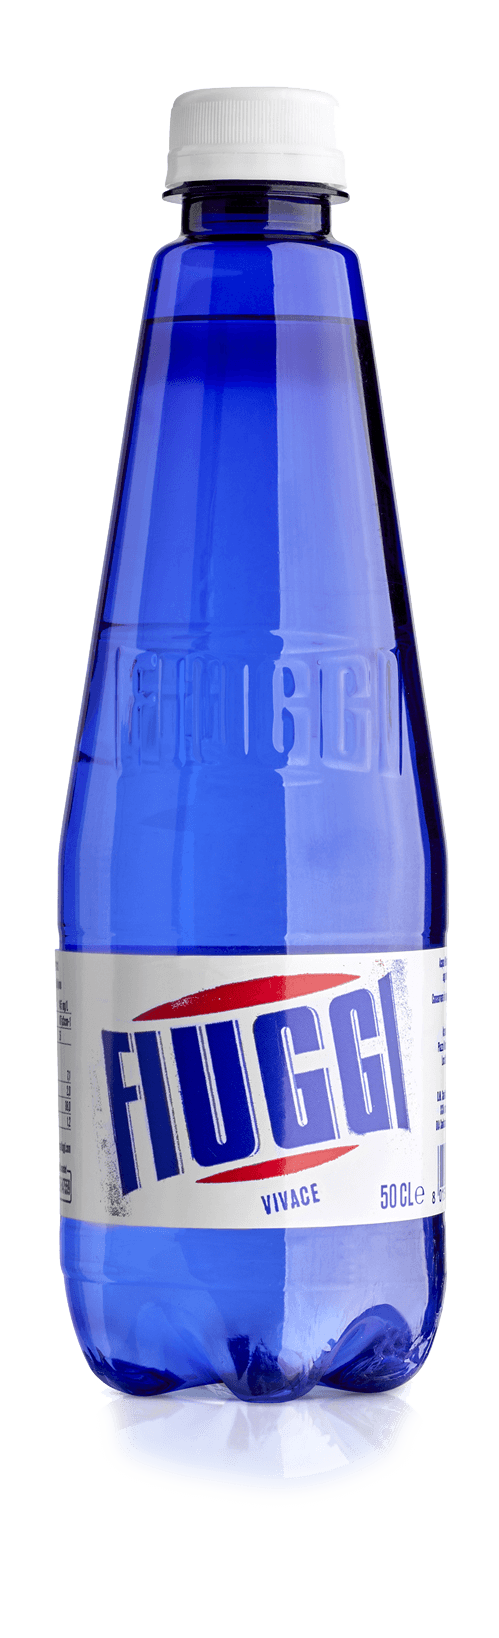 Beverage - Sparkling Fiuggi Water To Go.16.9 Fluid Ounce Bottles. Convenient Plastic Bottle.  2 - 6 Packs - Free Shipping